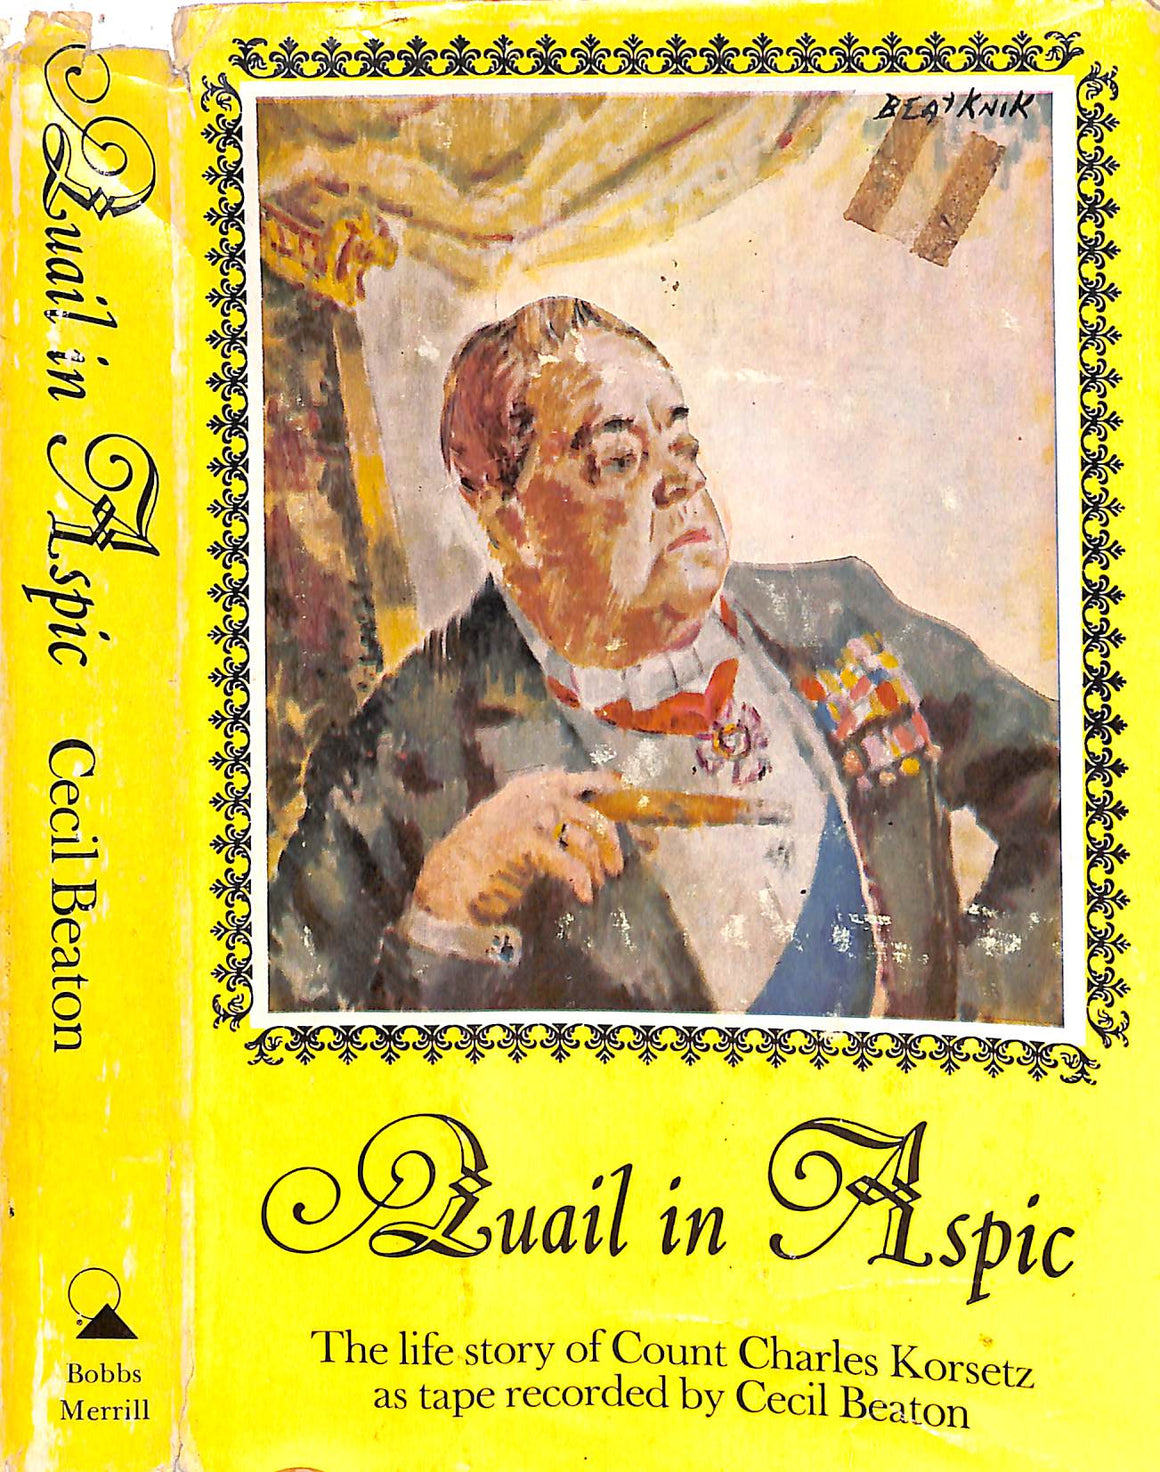 "Quail In Aspic: The Life Story Of Count Charles Korsetz As Tape-Recorded To Cecil Beaton" 1963 BEATON, Cecil